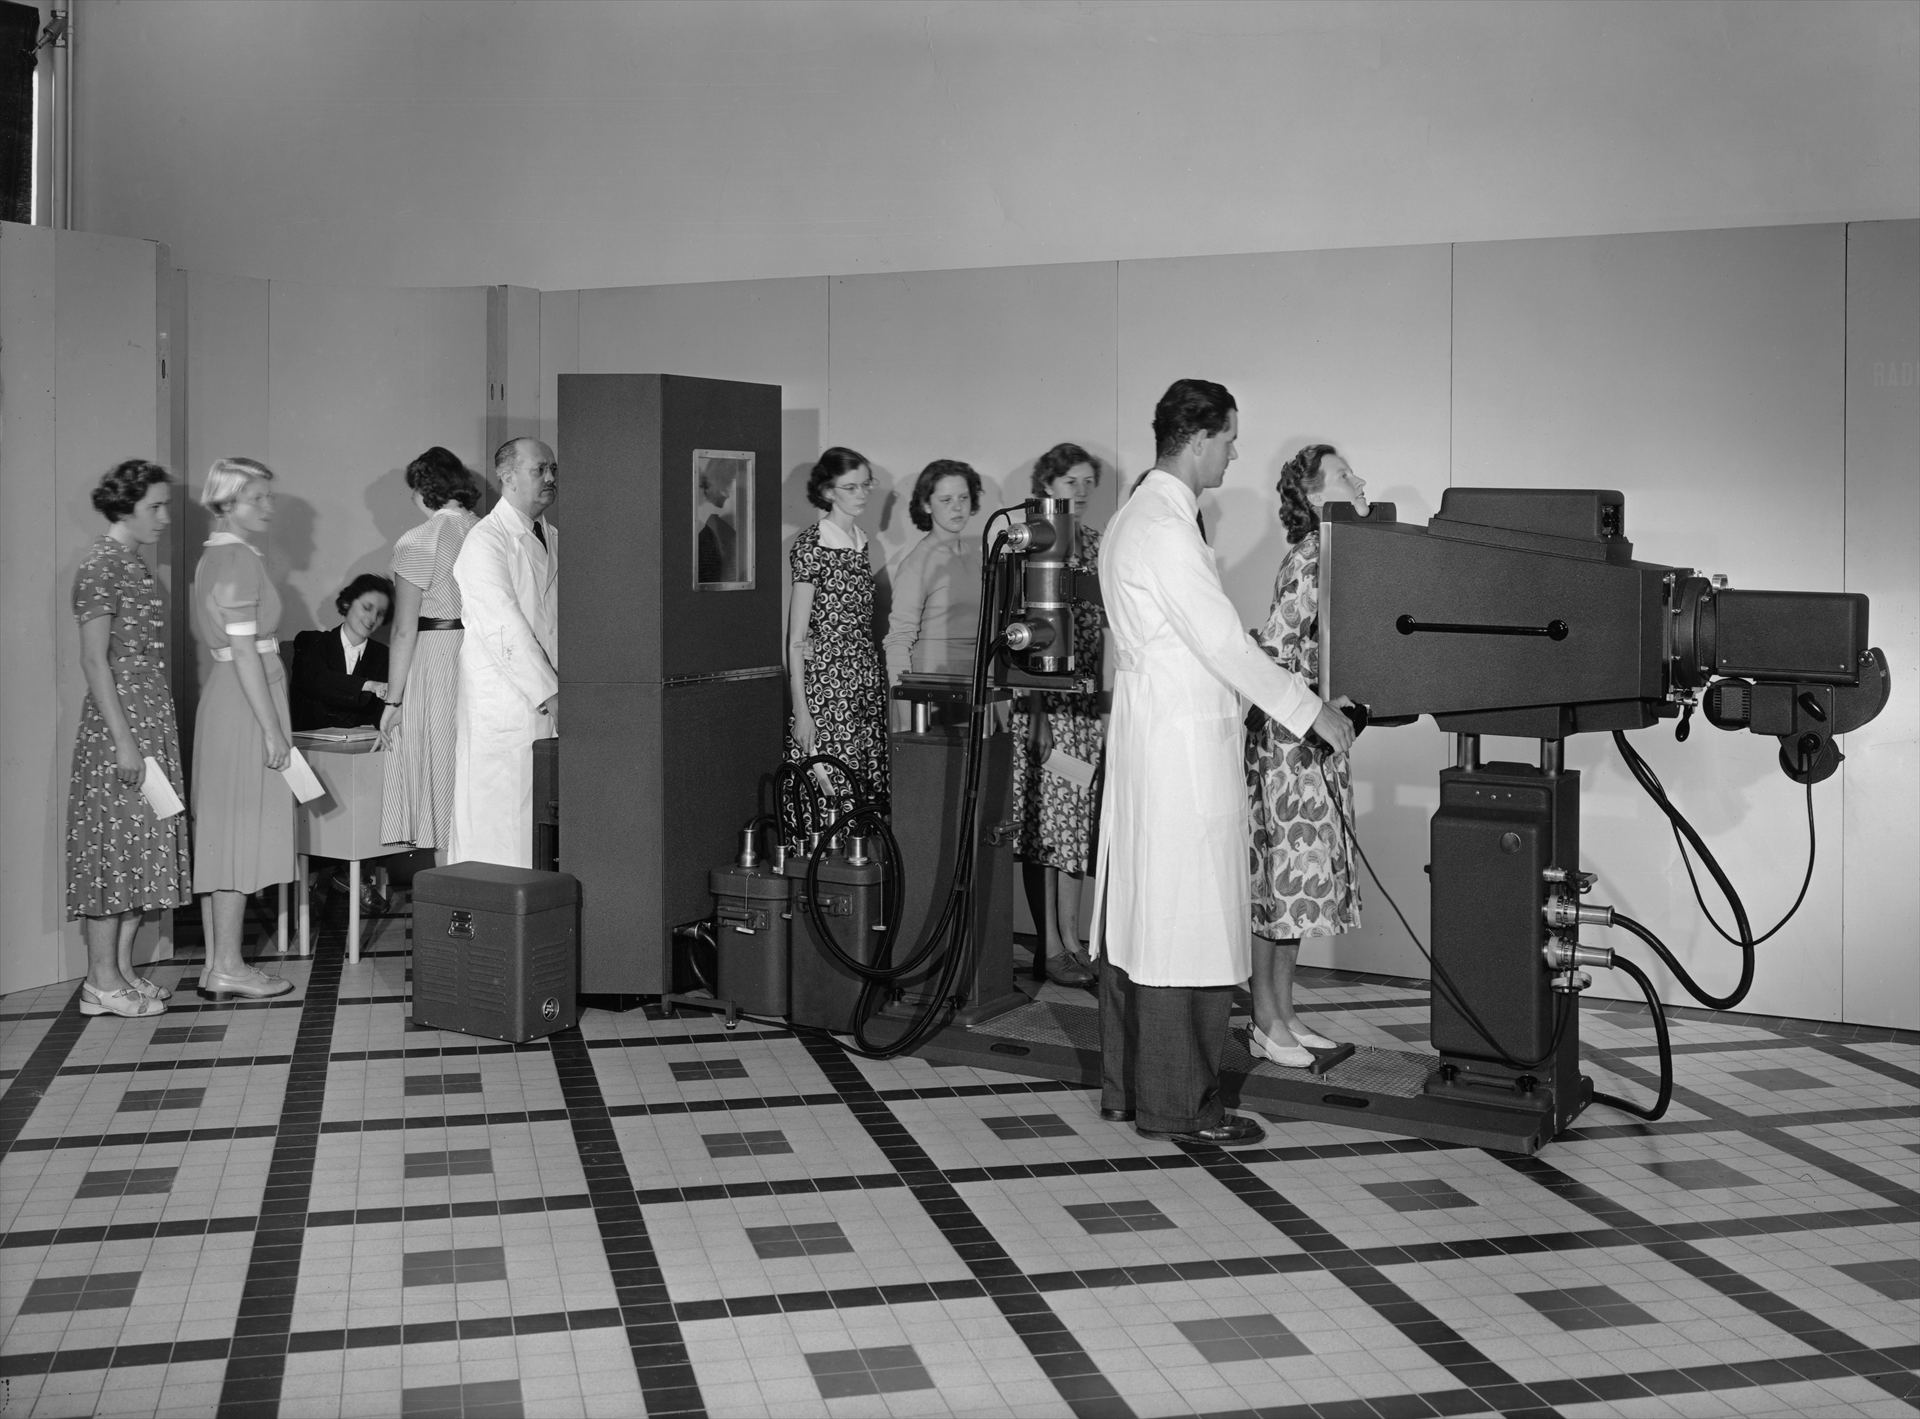 Screening Philips staff for or tuberculosis in 1951 in the Netherlands